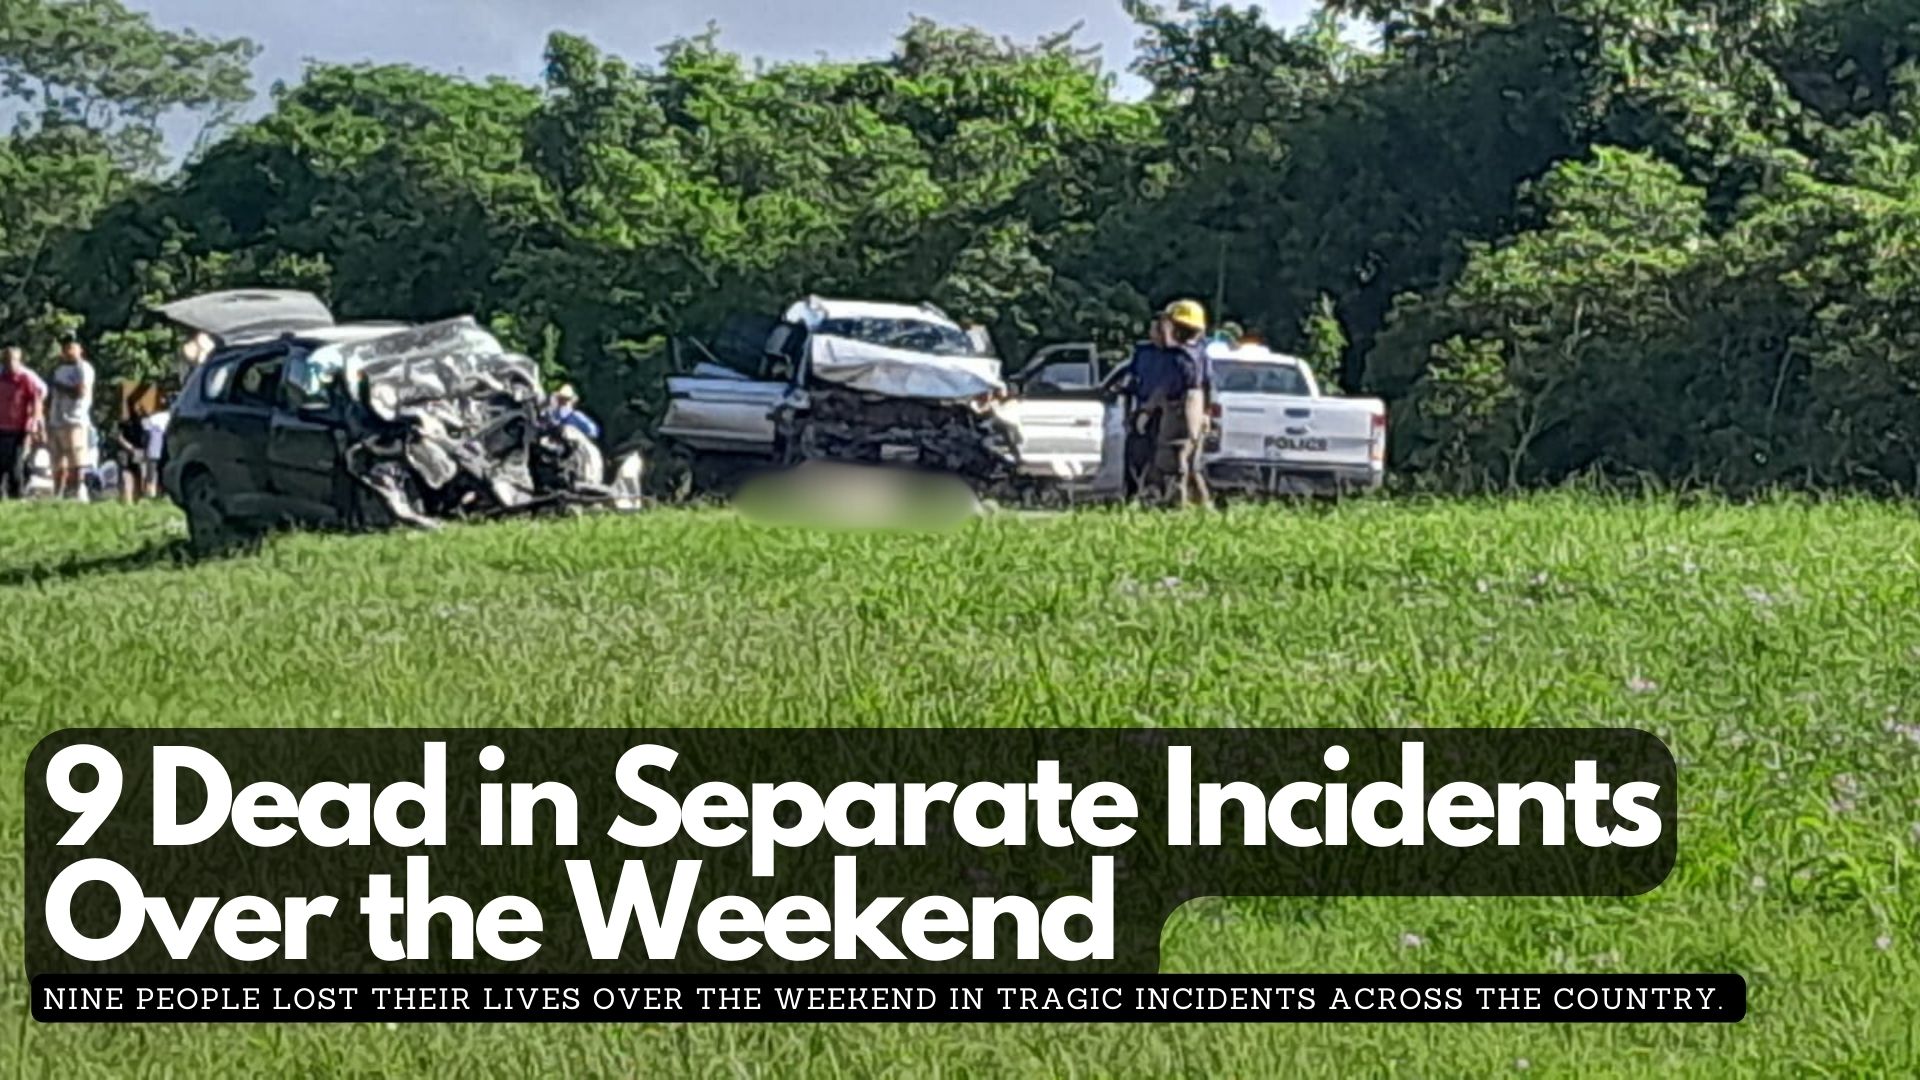 9 Dead in Separate Incidents Over the Weekend